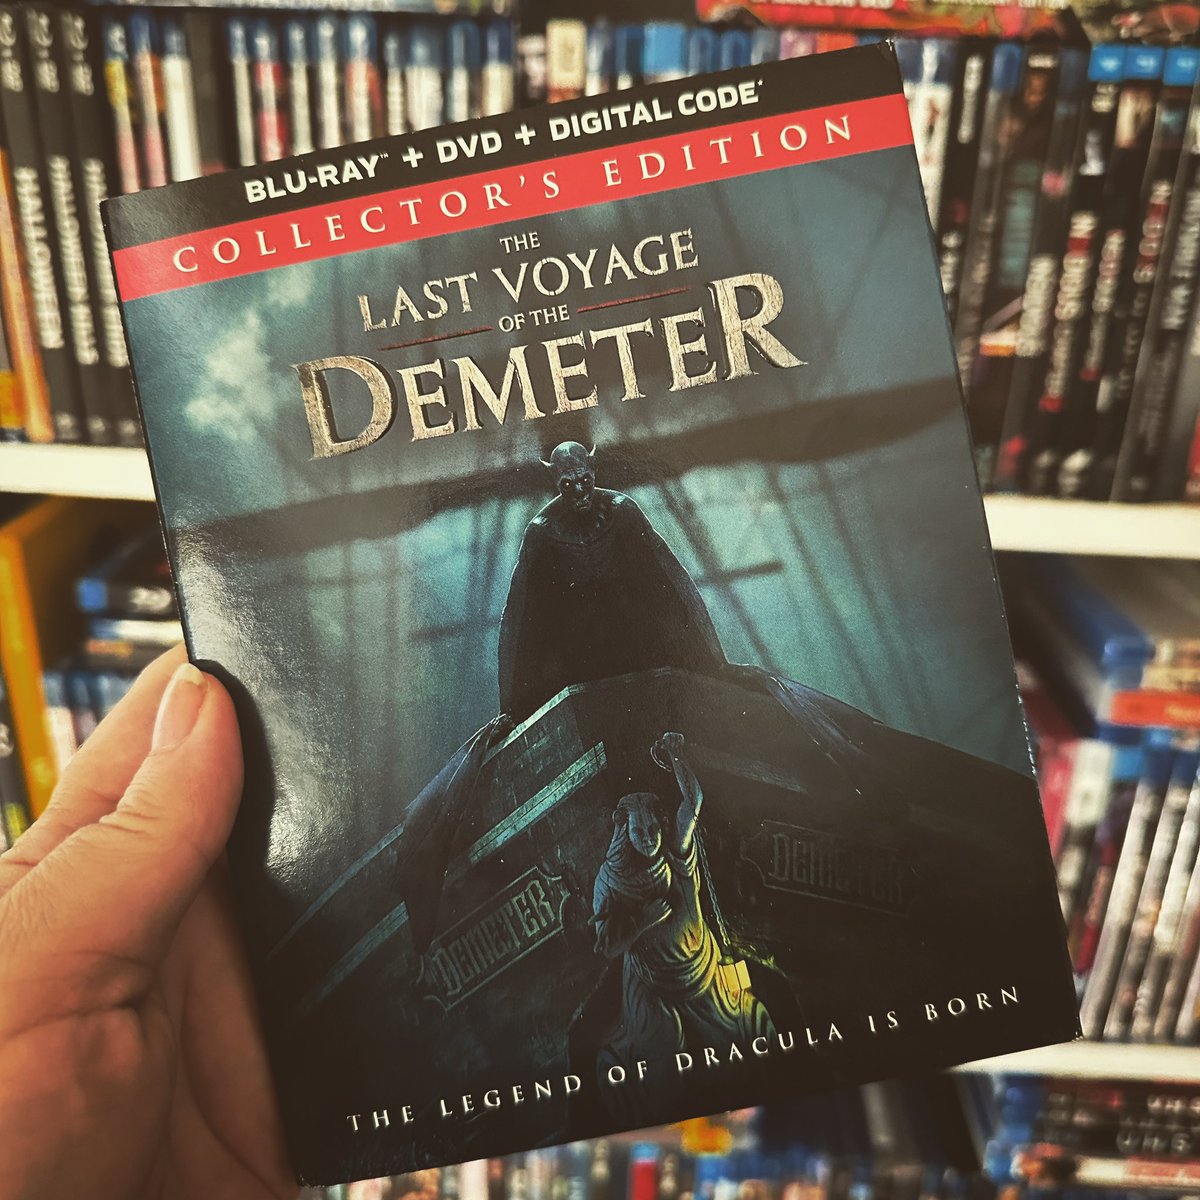 Thank you @UniversalPics & @Demetermovie for sending over a copy of The Last Voyage of the Demeter which is out today on Digital, Blu-ray, & DVD! I’ll be diving into the bonus features this week & have a review on the site soon! Stay tuned!

#DemeterMovie @UniversalHorror